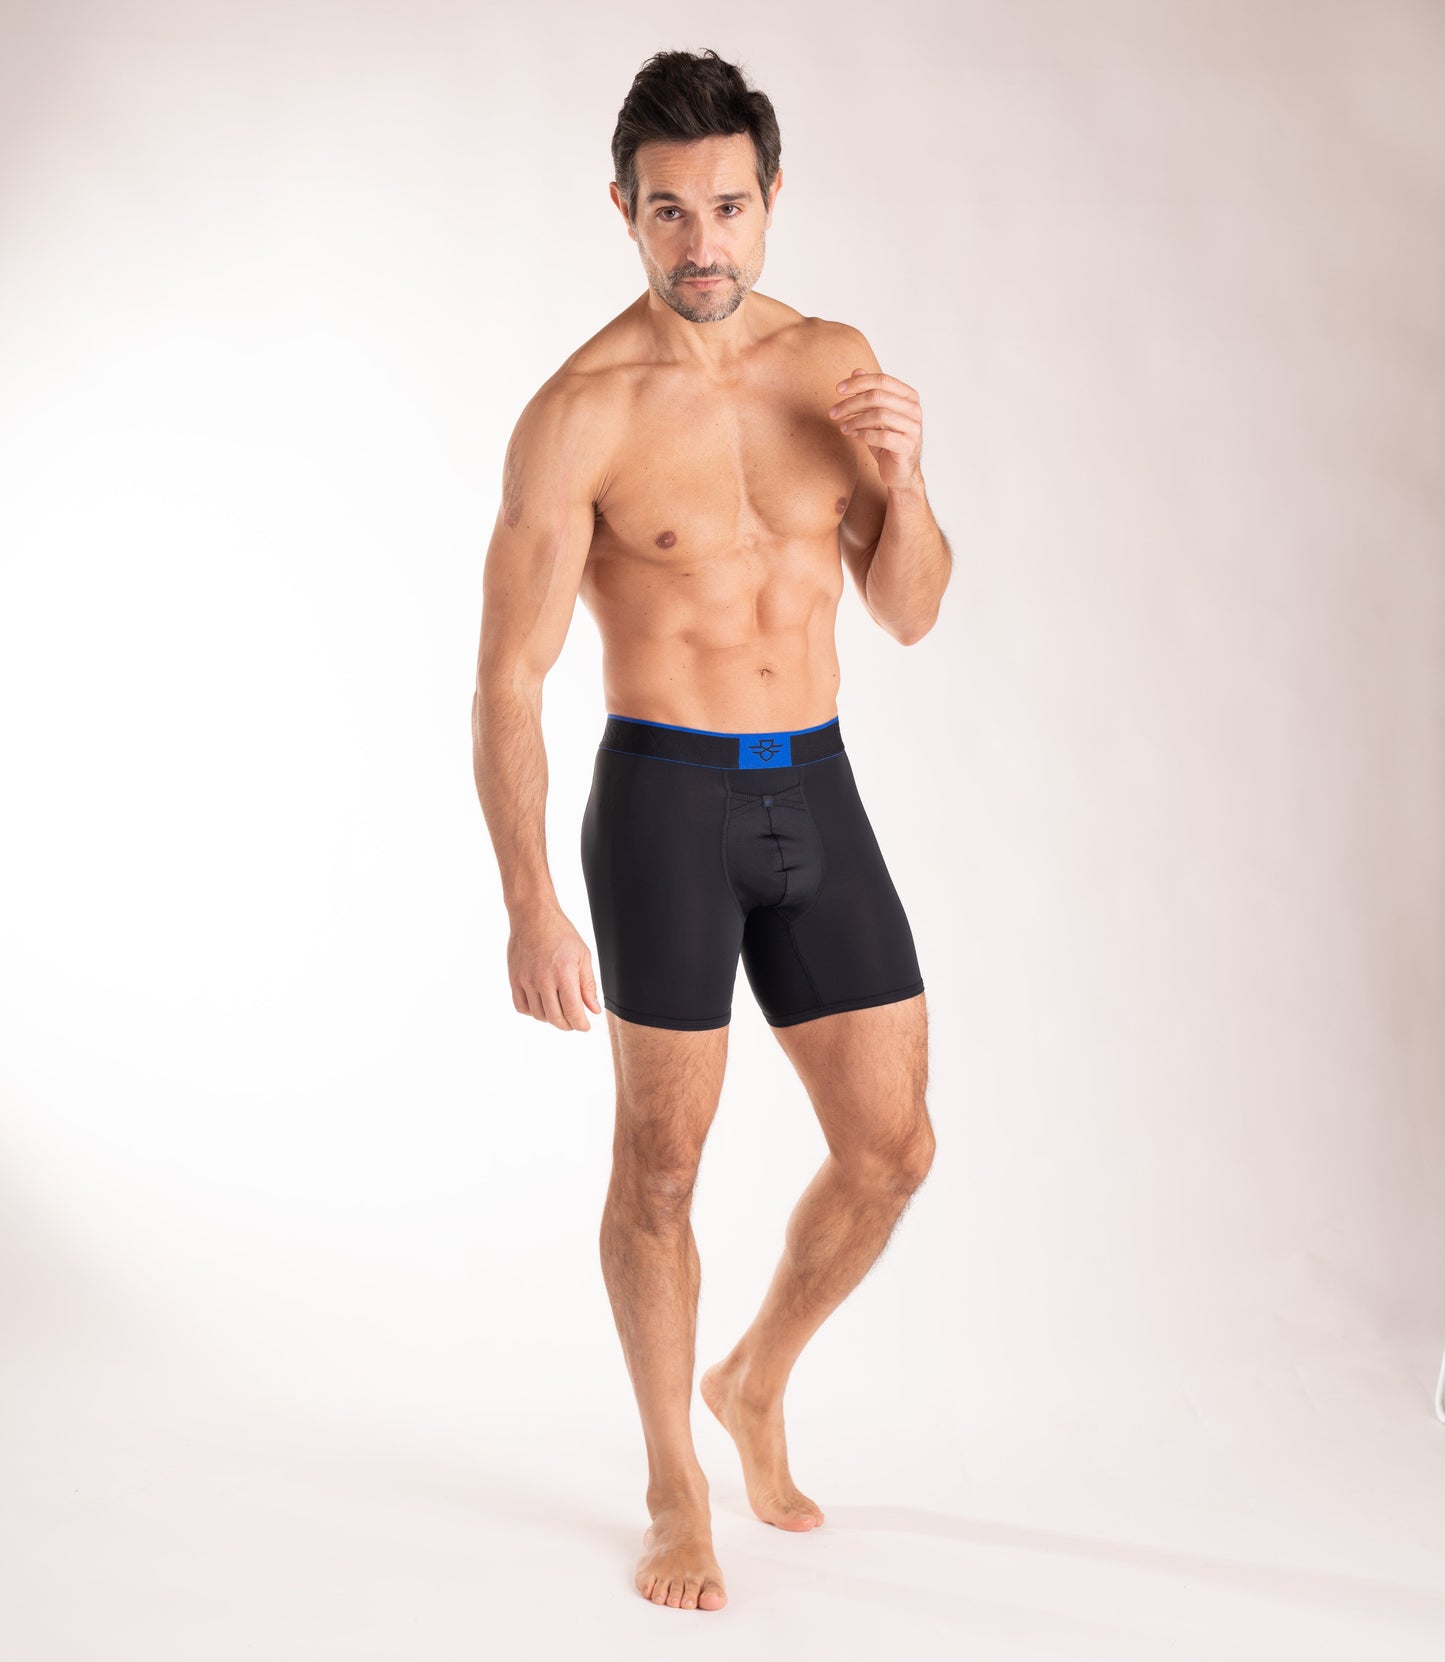 Crossfly men's Pro 7" black / royal boxers from the Performance series, featuring X-Fly and Coccoon internal pocket support.